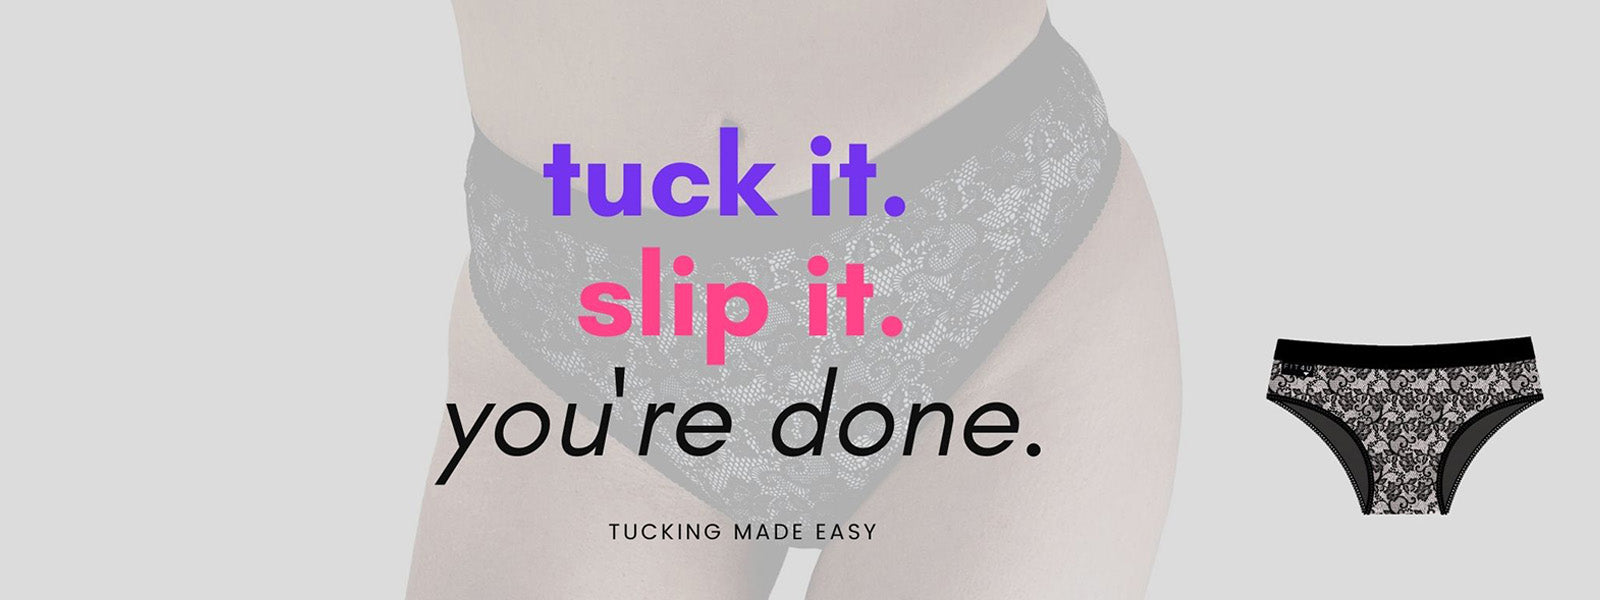 Tucking, made easy. Tuck it Sex Pic Hd